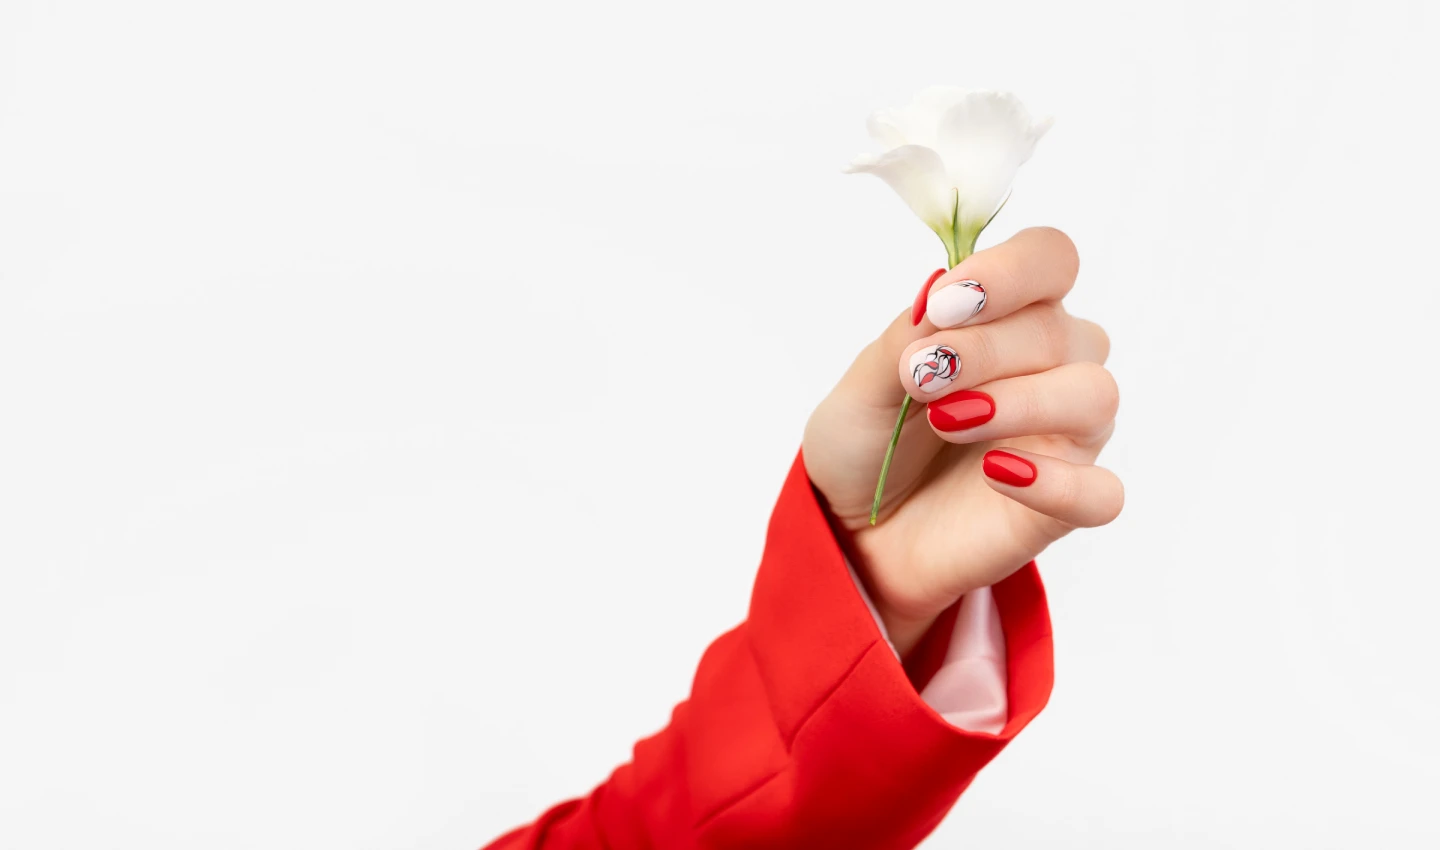 A beautiful hand holding a flower showcasing dazzling nail designs.